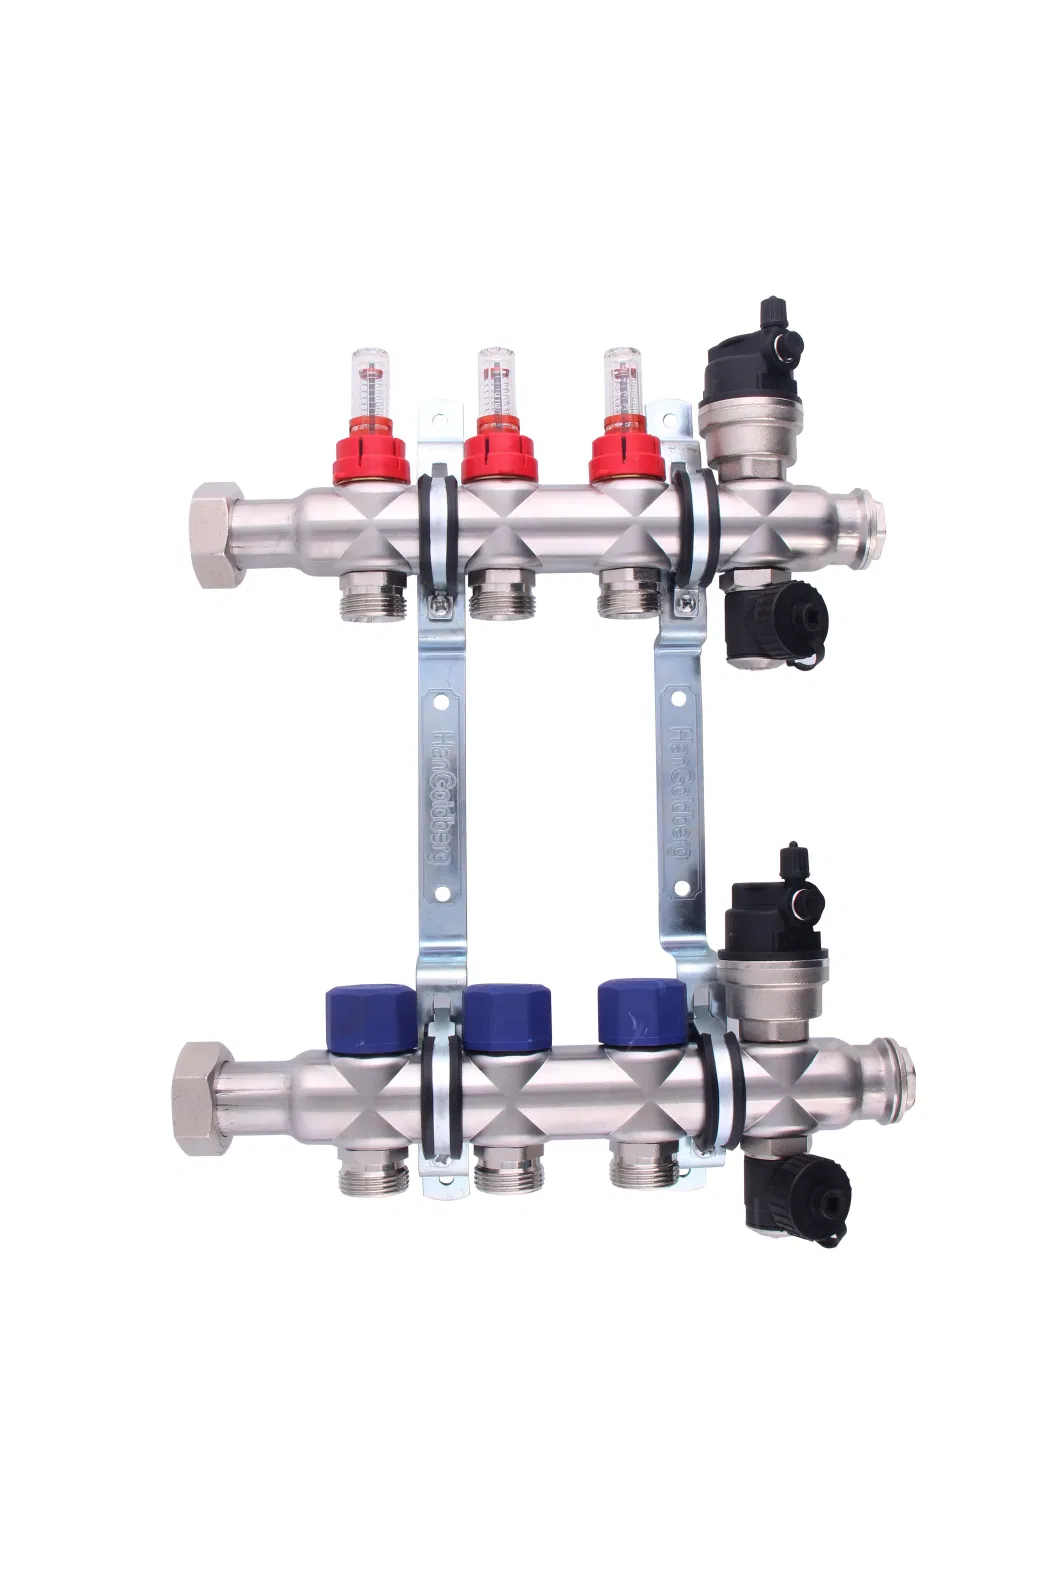 Stainless Steel 304 Manifolds with 16 Type Flow Meters. Brass Auto Air Vent, Drain Valve and Outputs of The Eurocone Standard